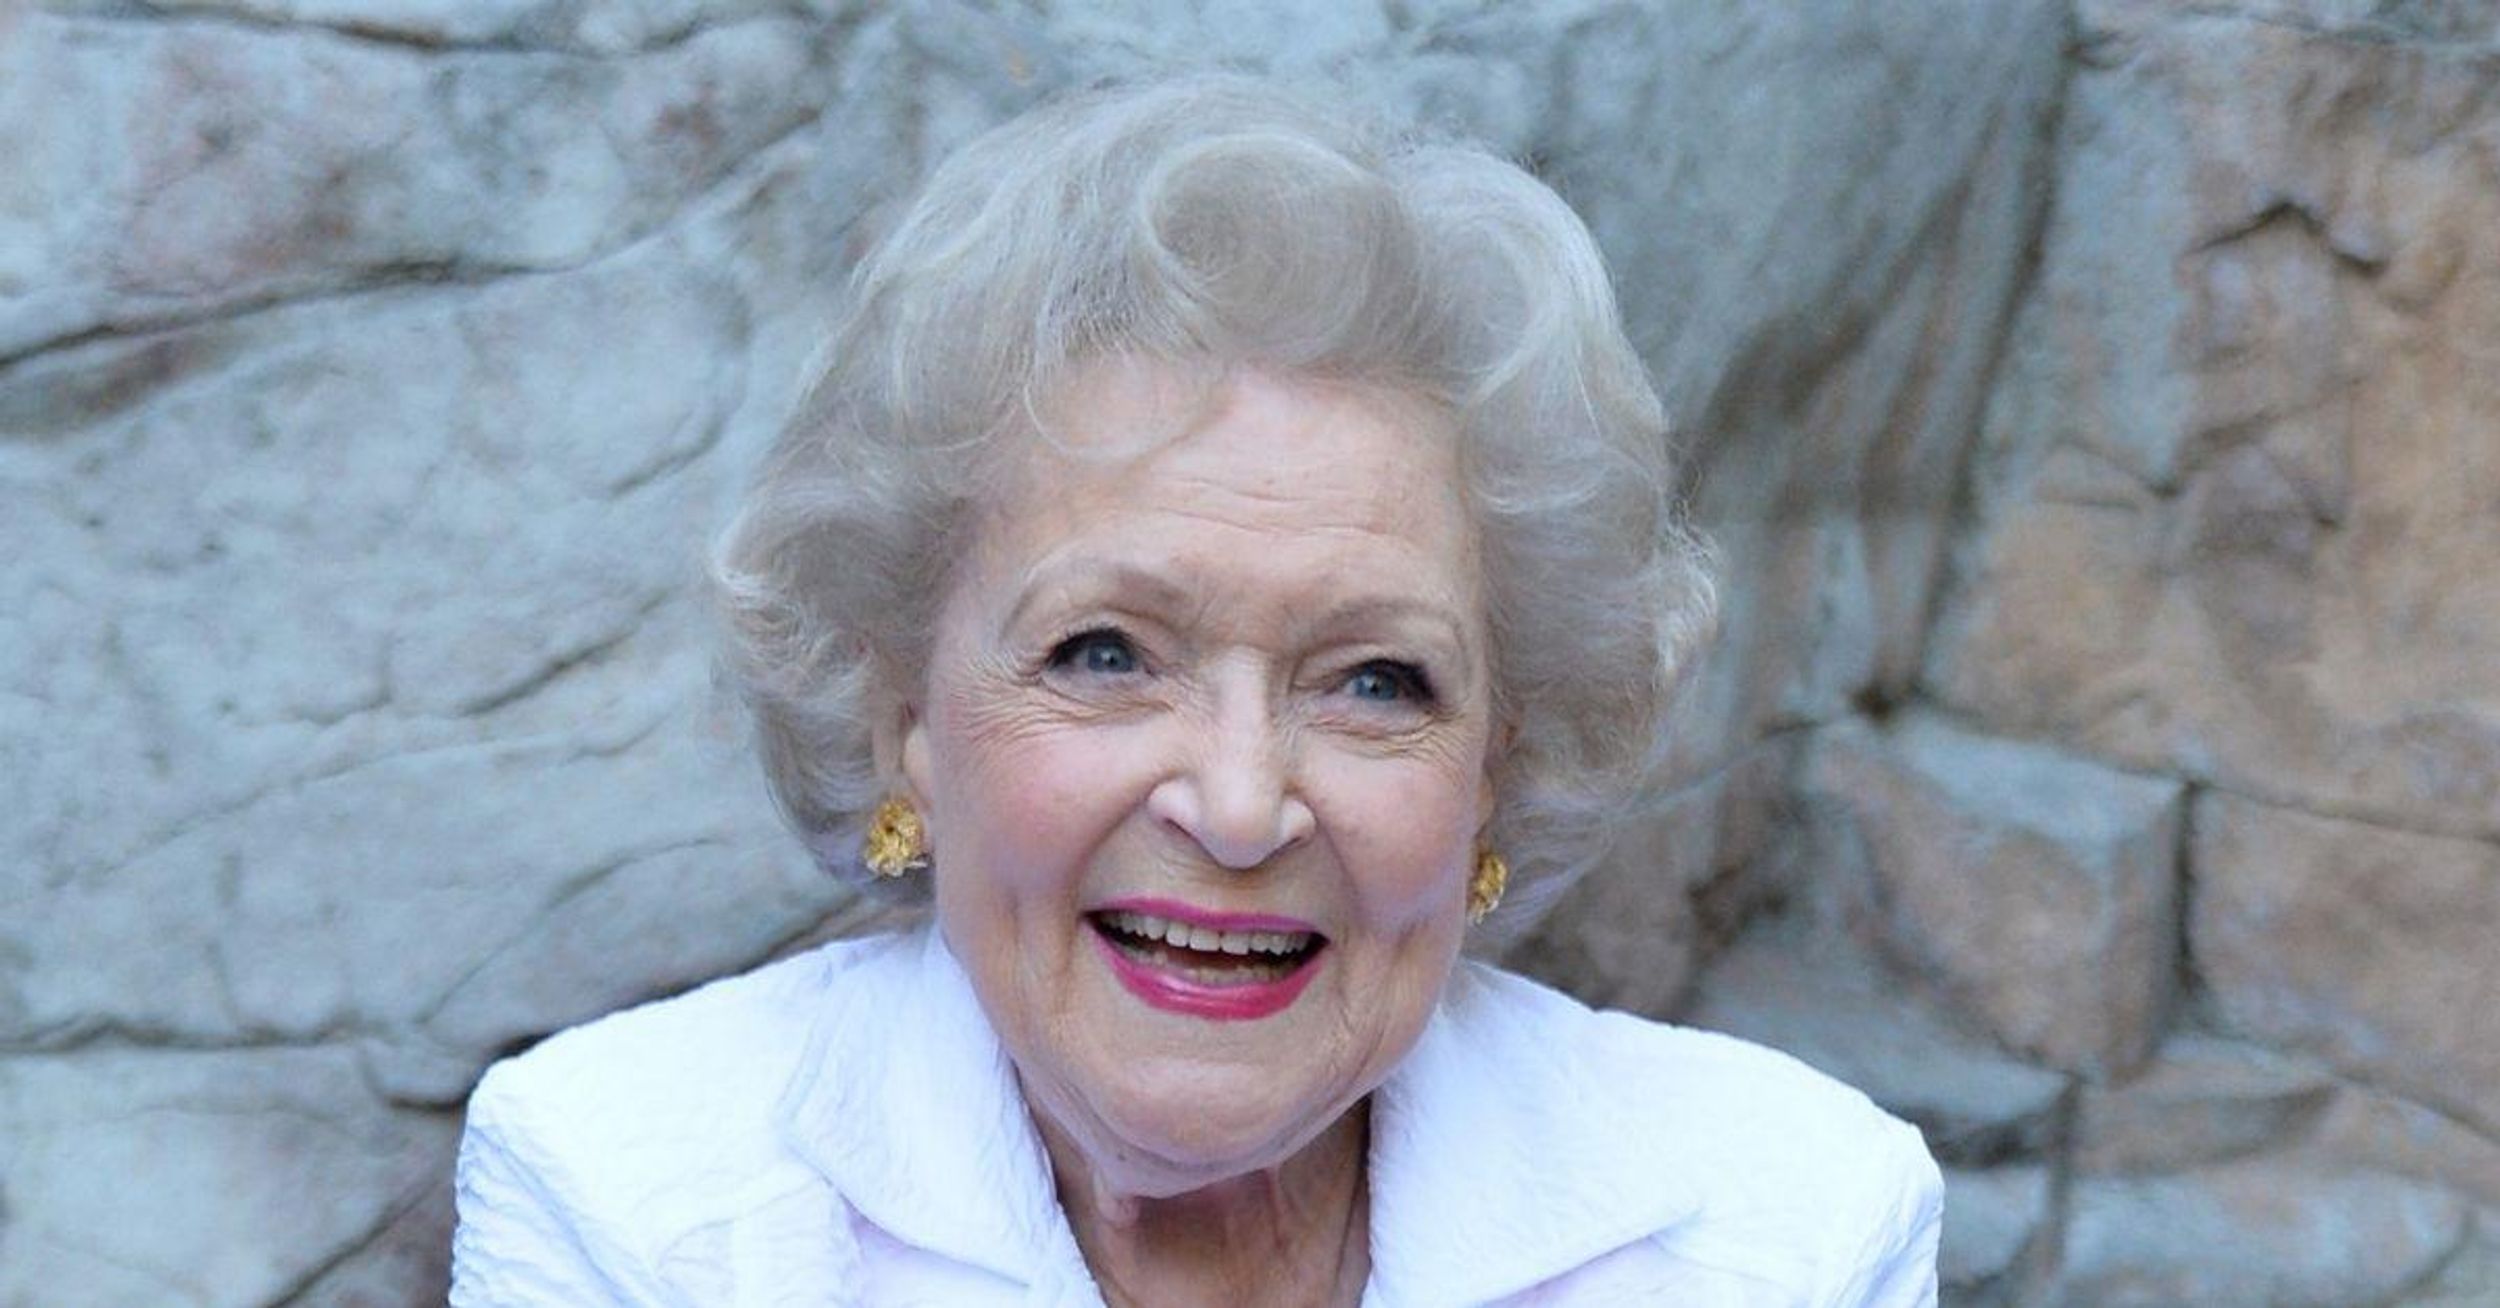 Assistant Shares Poignant 'Last Photo' Taken Of Betty White To Mark Her 100th Birthday